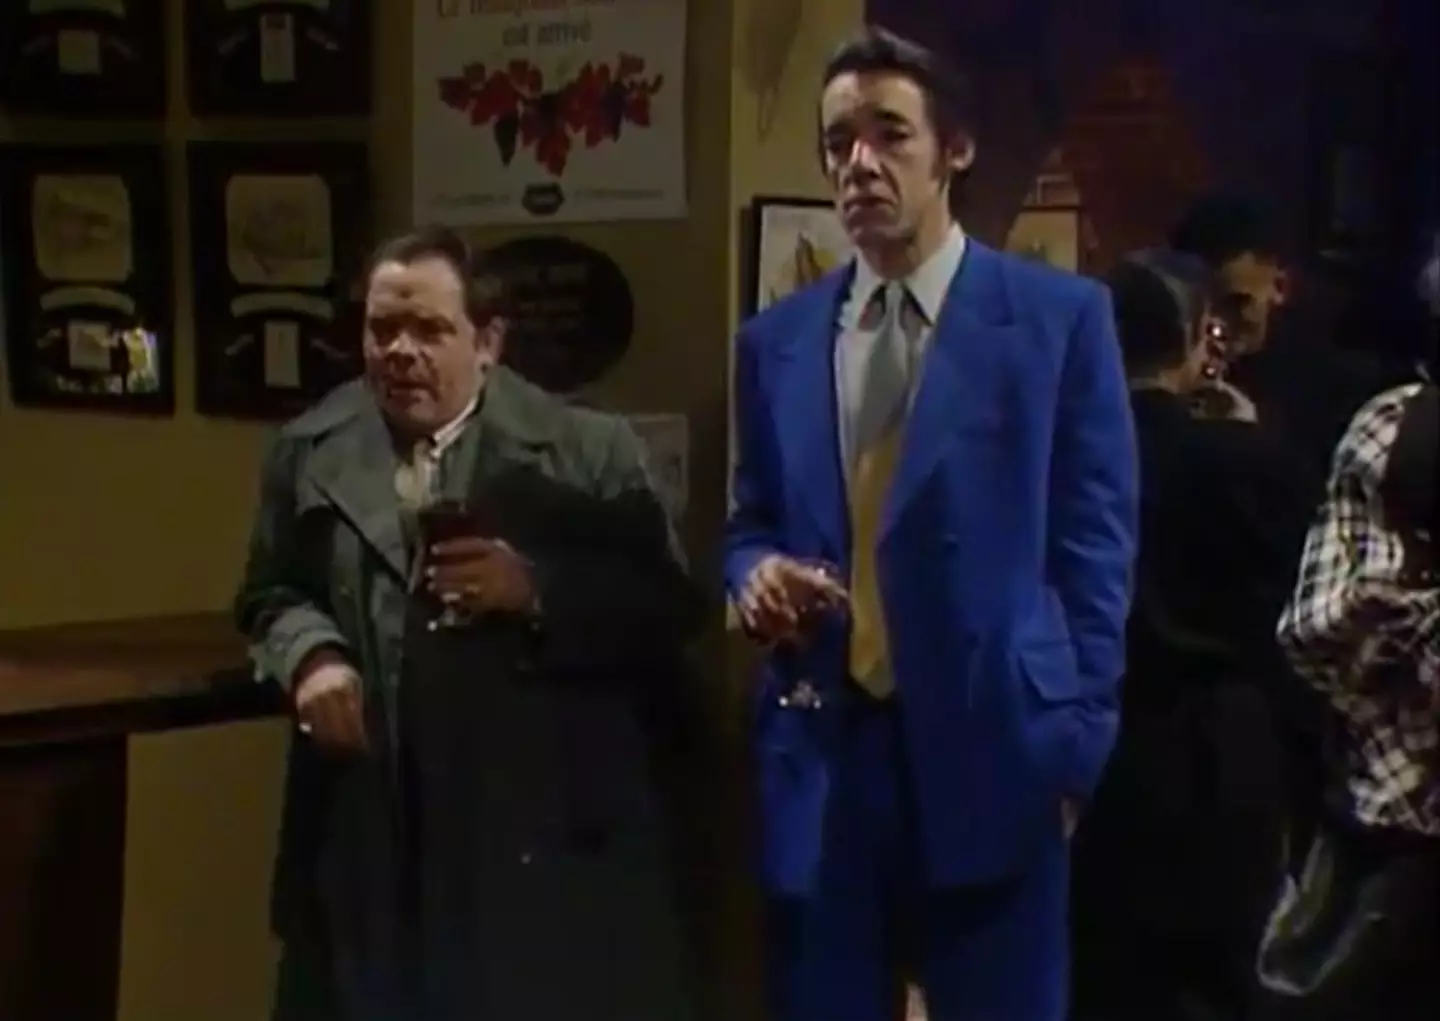 Del Boy falling through the bar is an iconic moment in comedy.